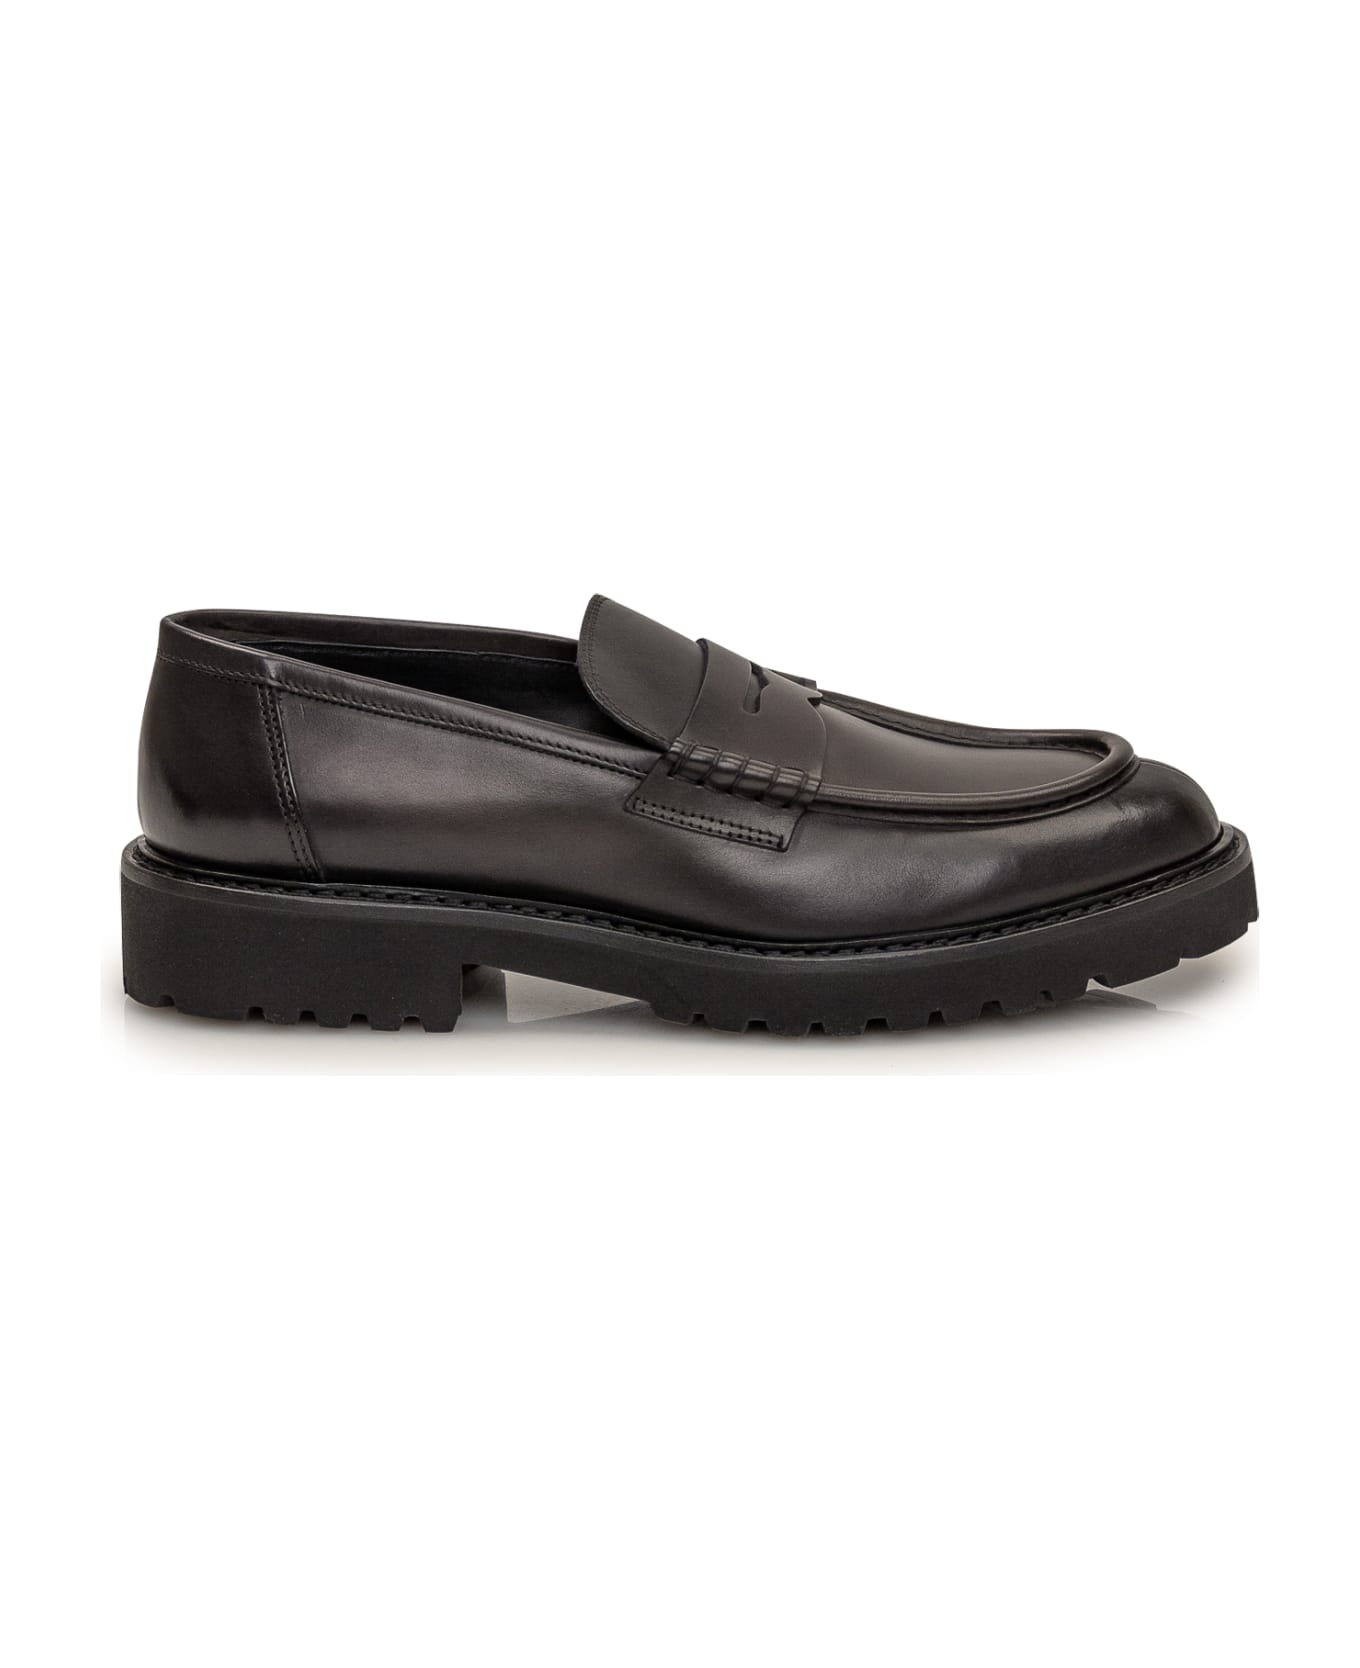 Doucal's Moccassin Edged - MILITARY